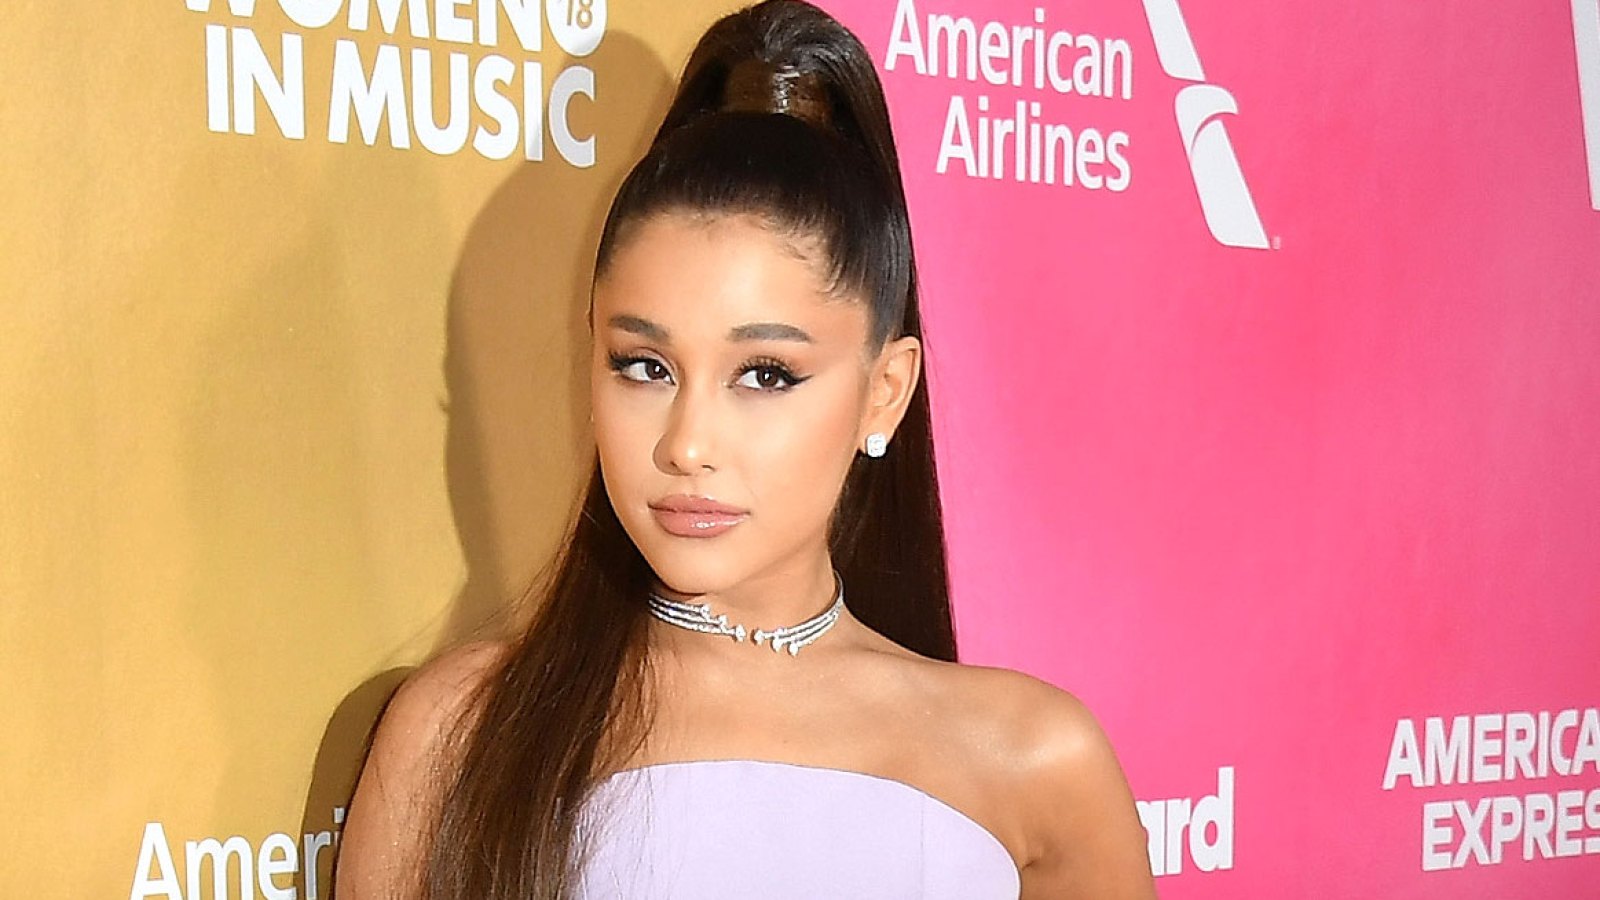 Ariana Grande Responds for Million-Dollar Offer to Remove Japanese BBQ Tattoo